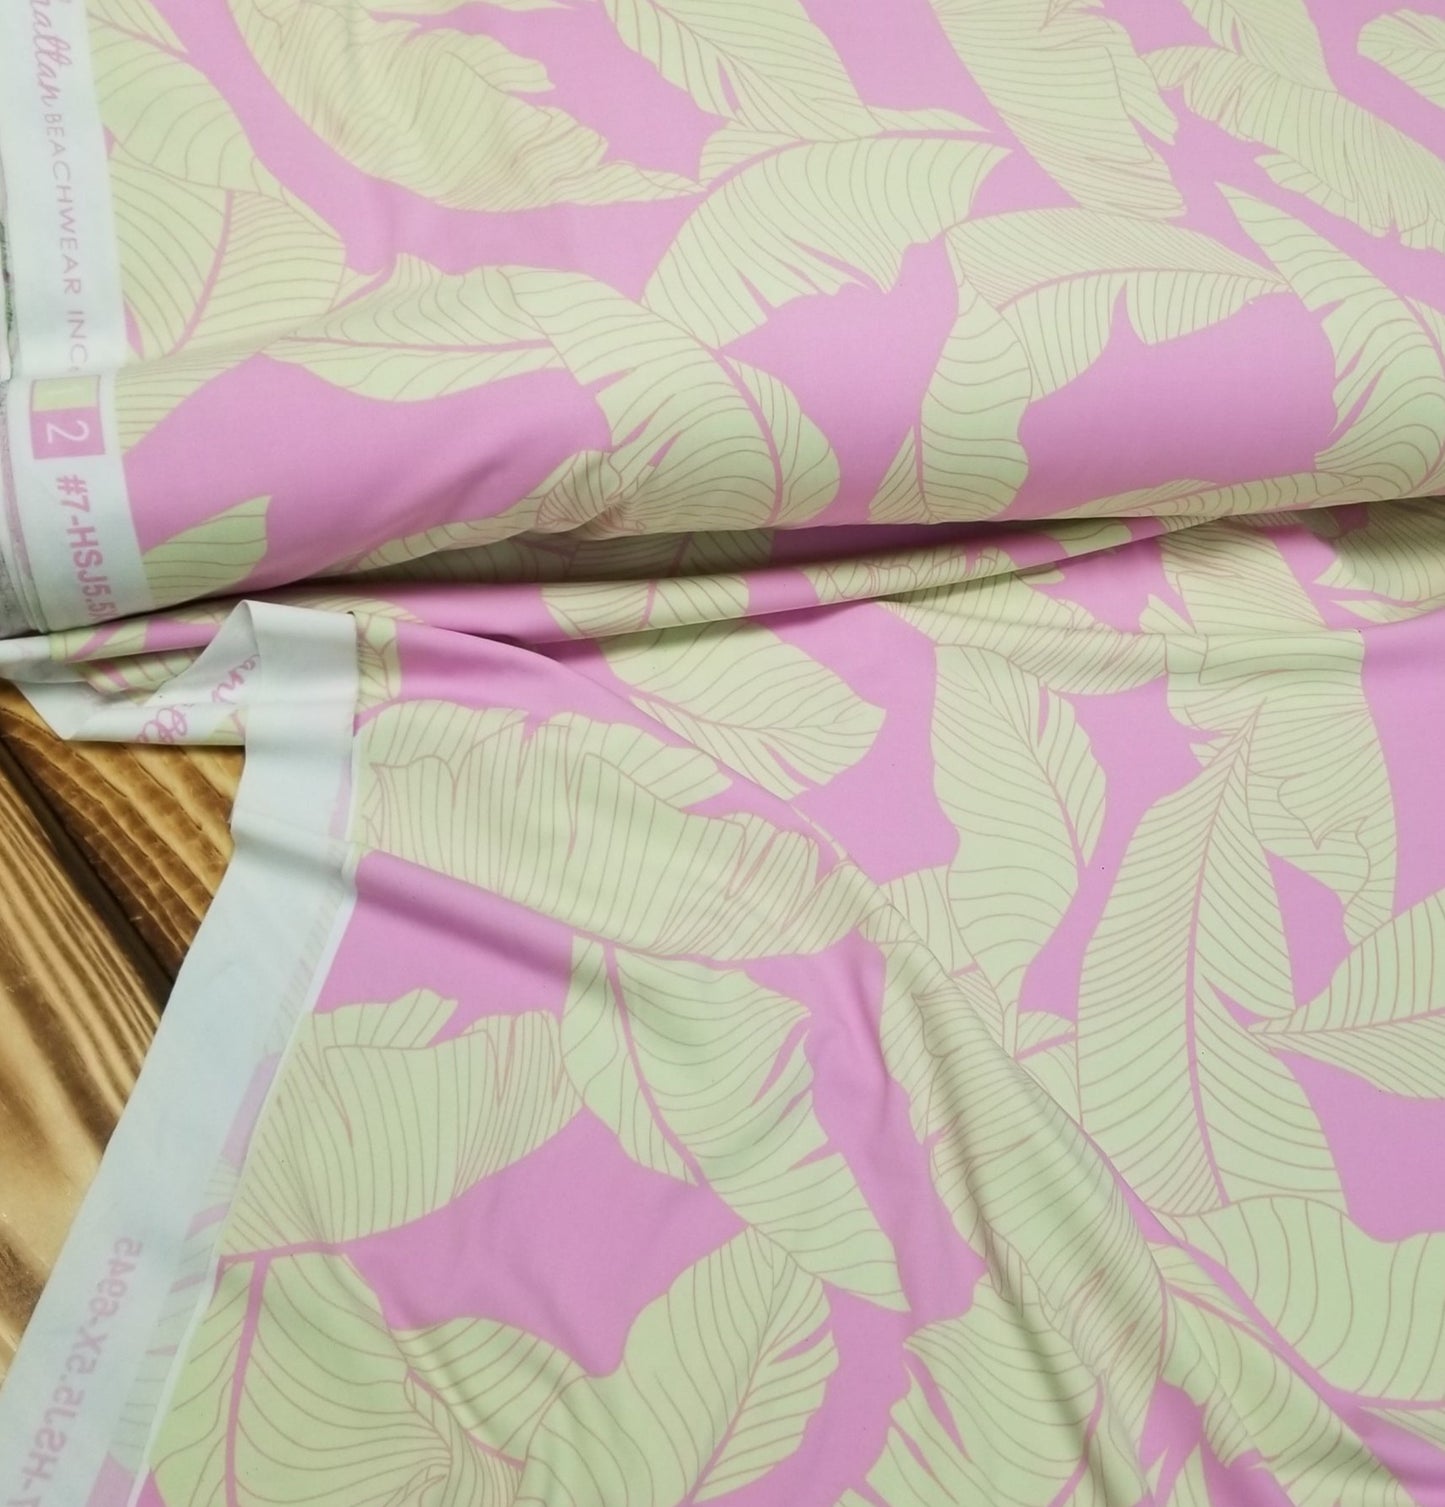 Nylon Spandex Pink and Taupe Beige Resort wear Leaves Swim/Activewear Knit- Sold by the yard